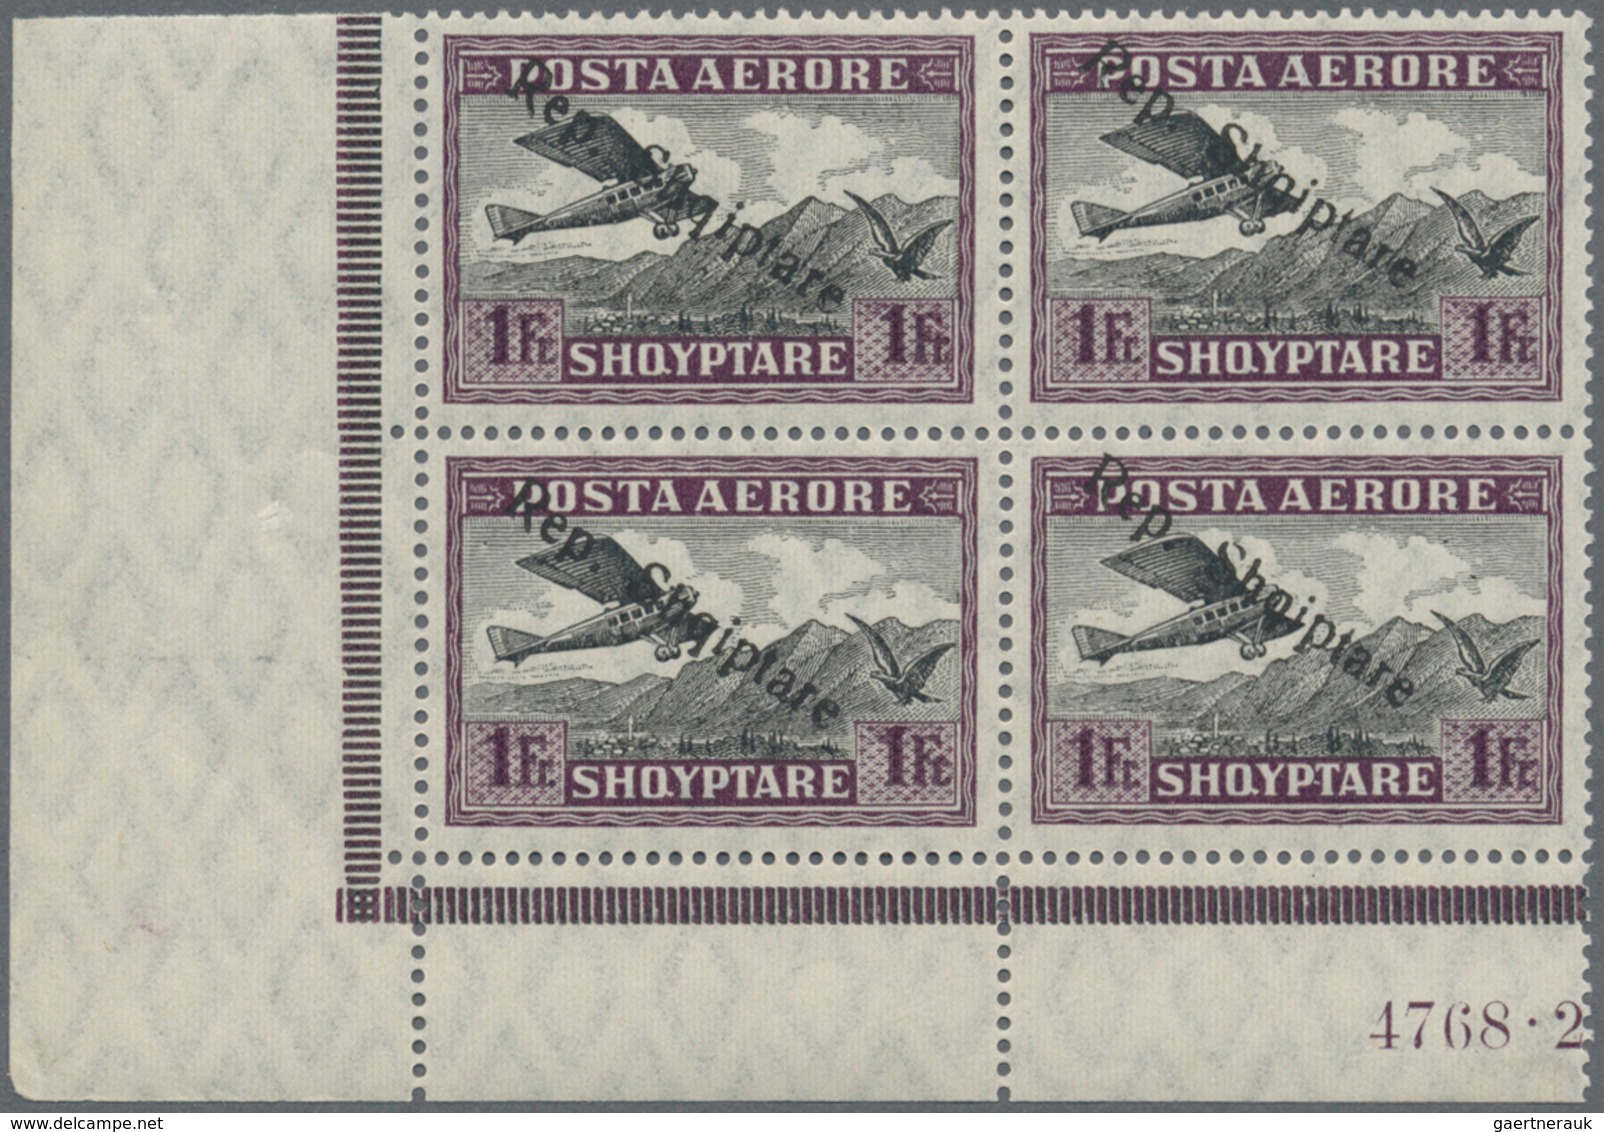 Albanien: 1927, 50 Q, 1 F And 2 F Airmail Stamps With Ovp "Rep.Shqiptare", 3 Lower Left Corner Block - Albanië